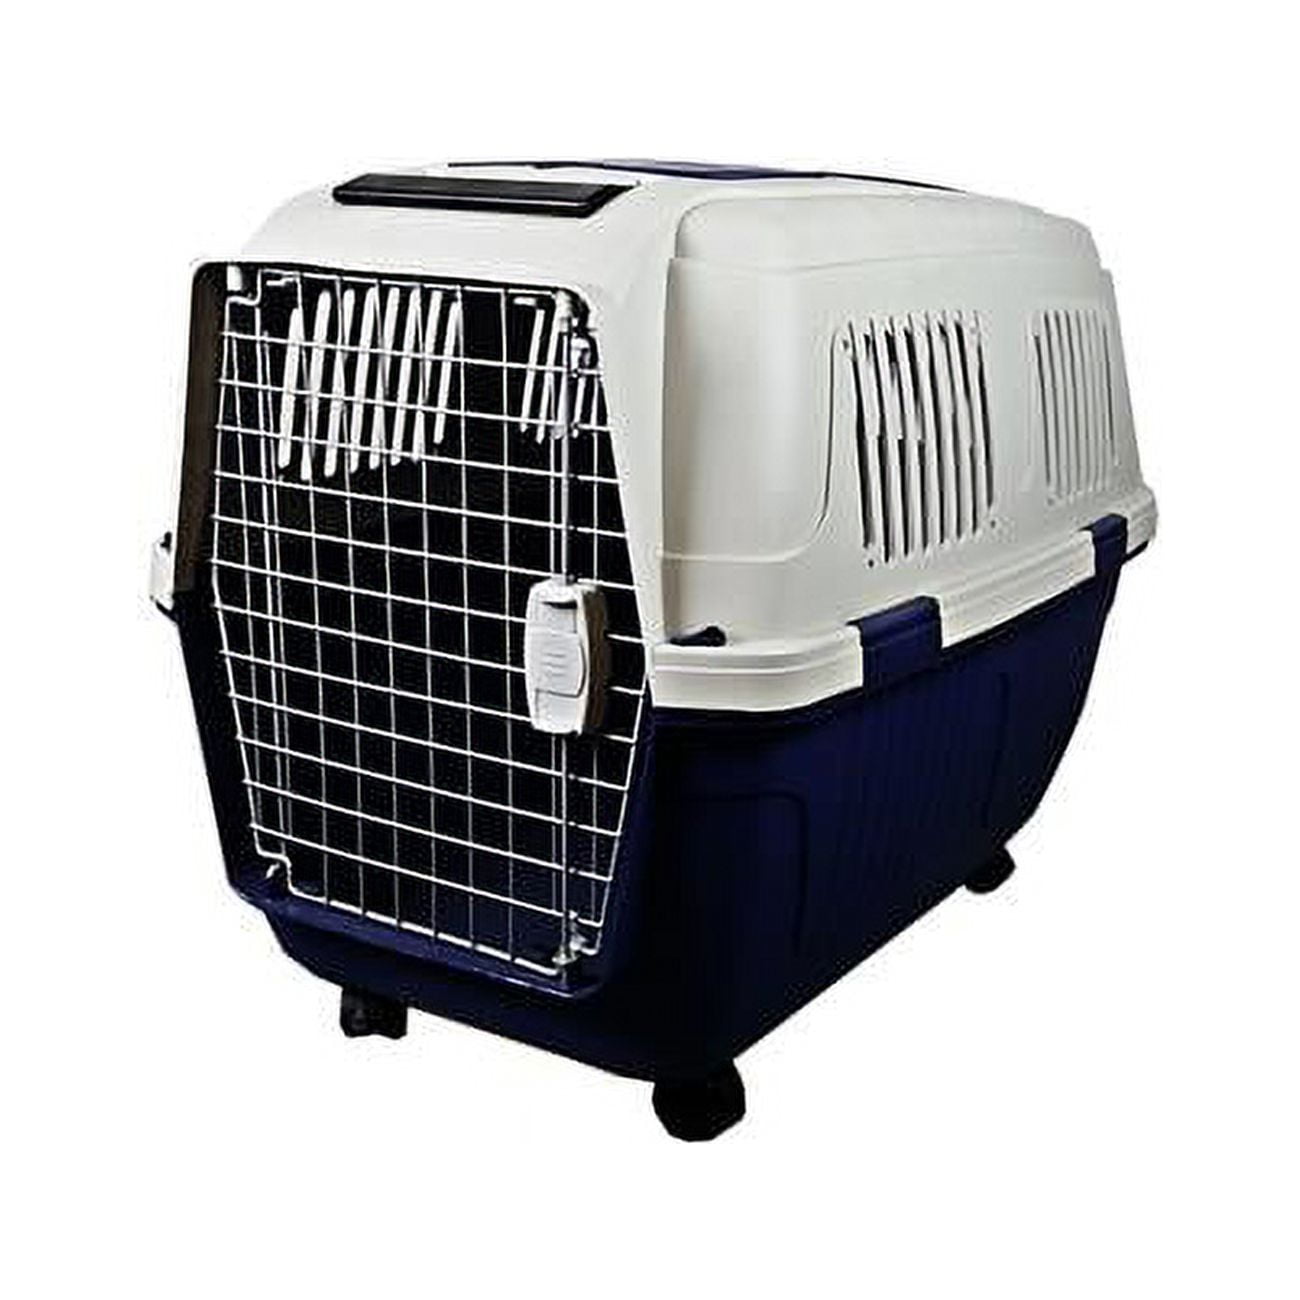 Cd7 Assorted 36 X 25 X 26 In. Deluxe Pet Carriers, Assorted Color